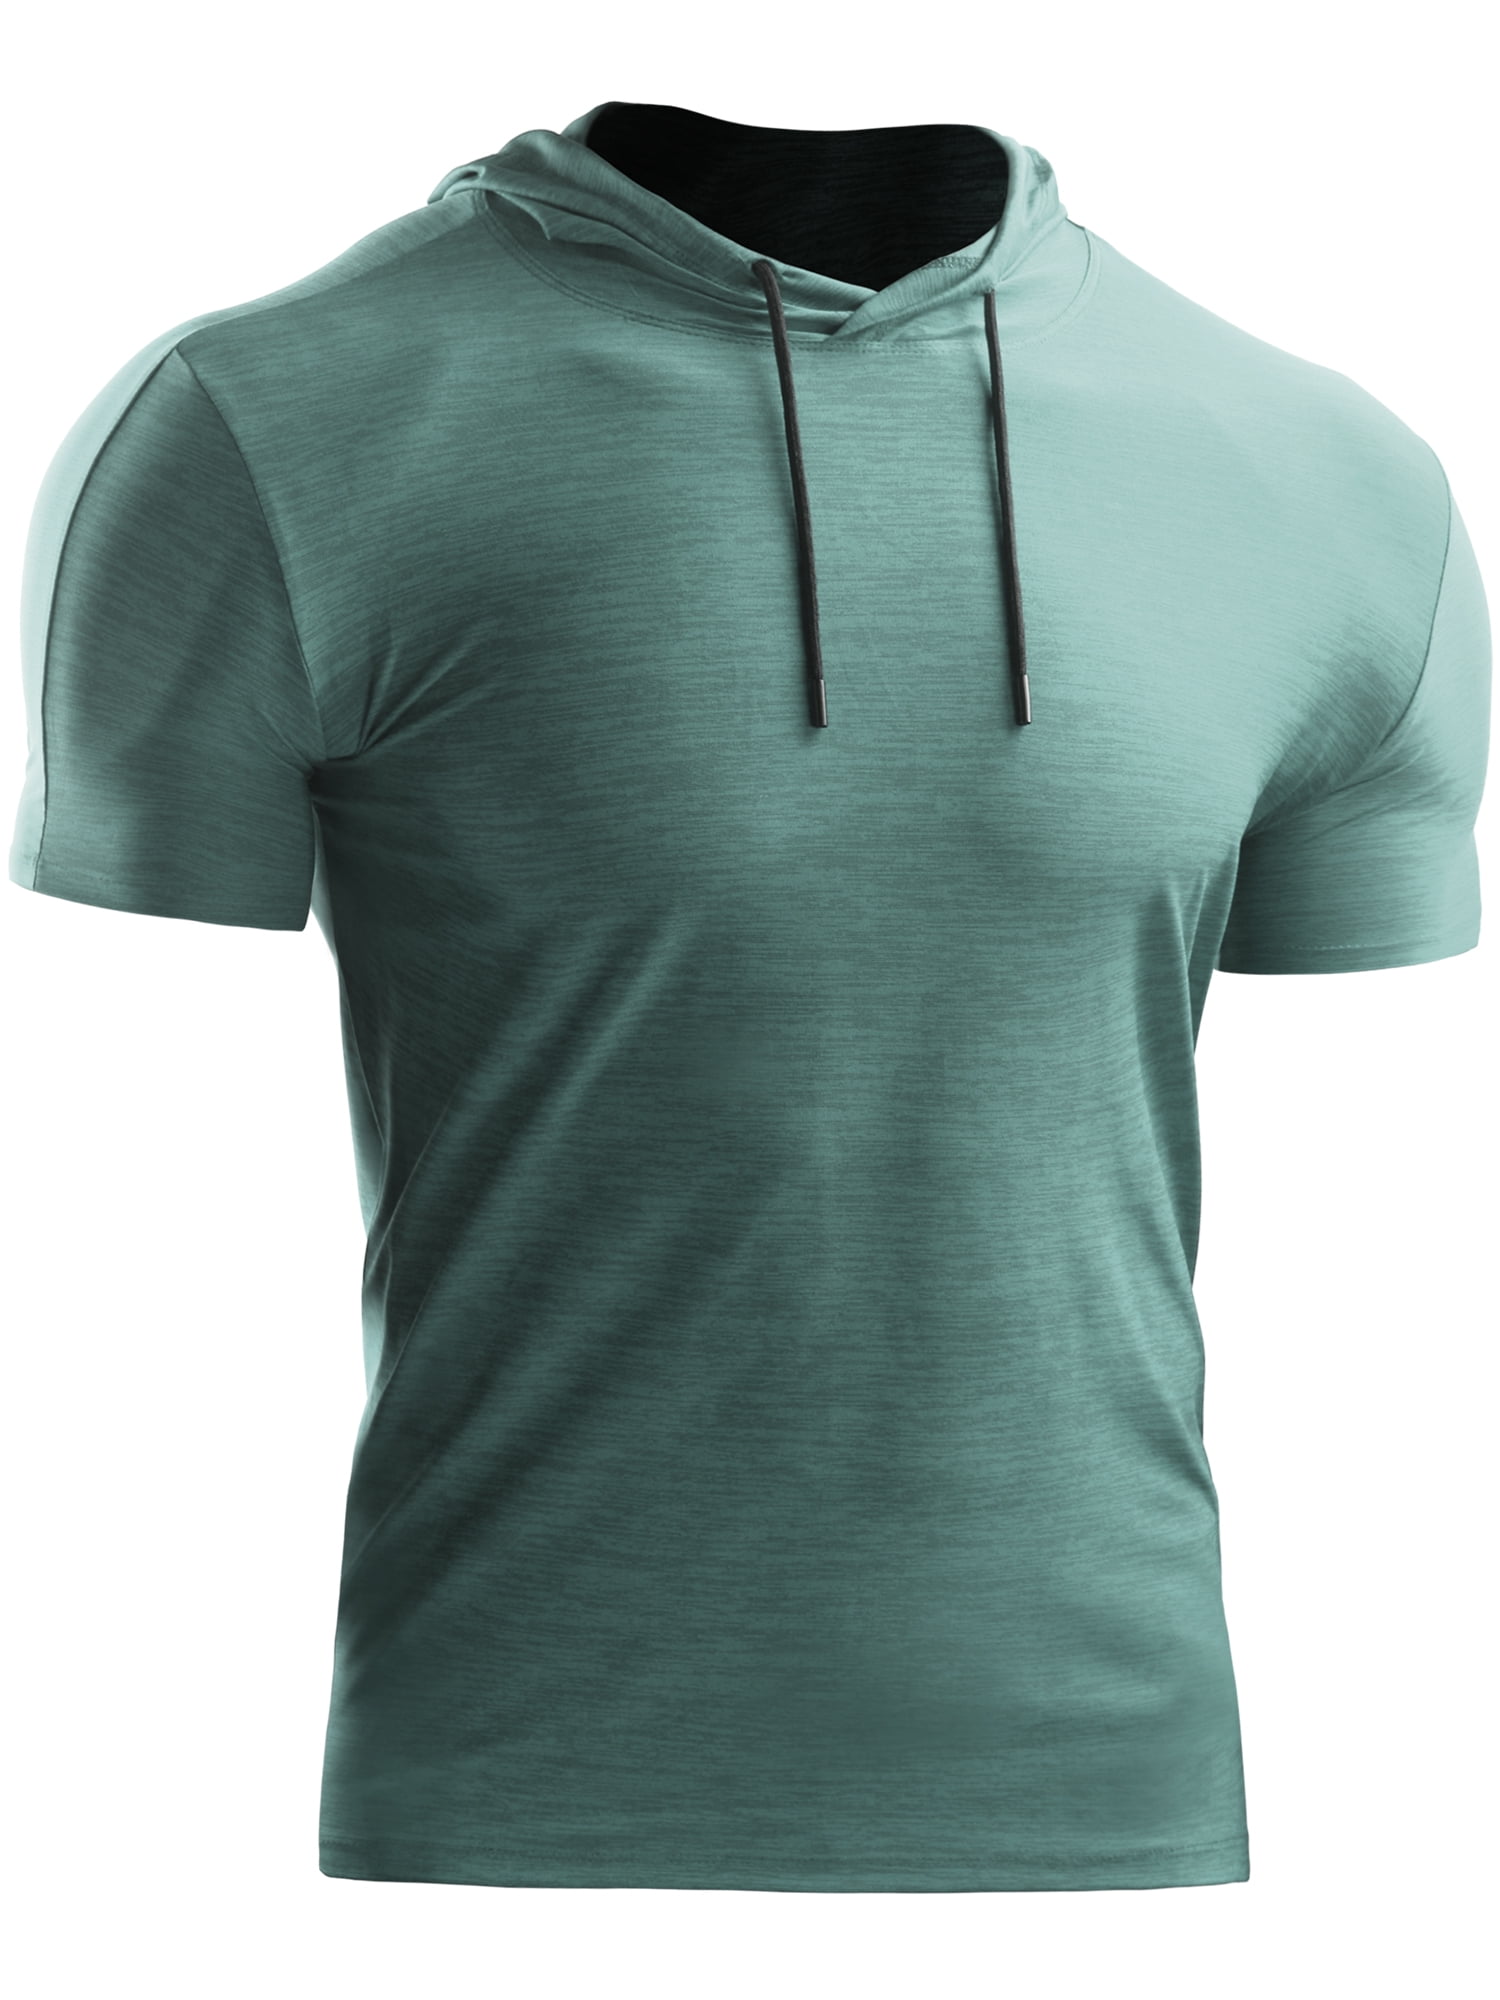 Lightweight Dry Fit Sweatshirts Short Sleeve Workout Running Gym Shirt with Hood Athletic Shirt for Men 